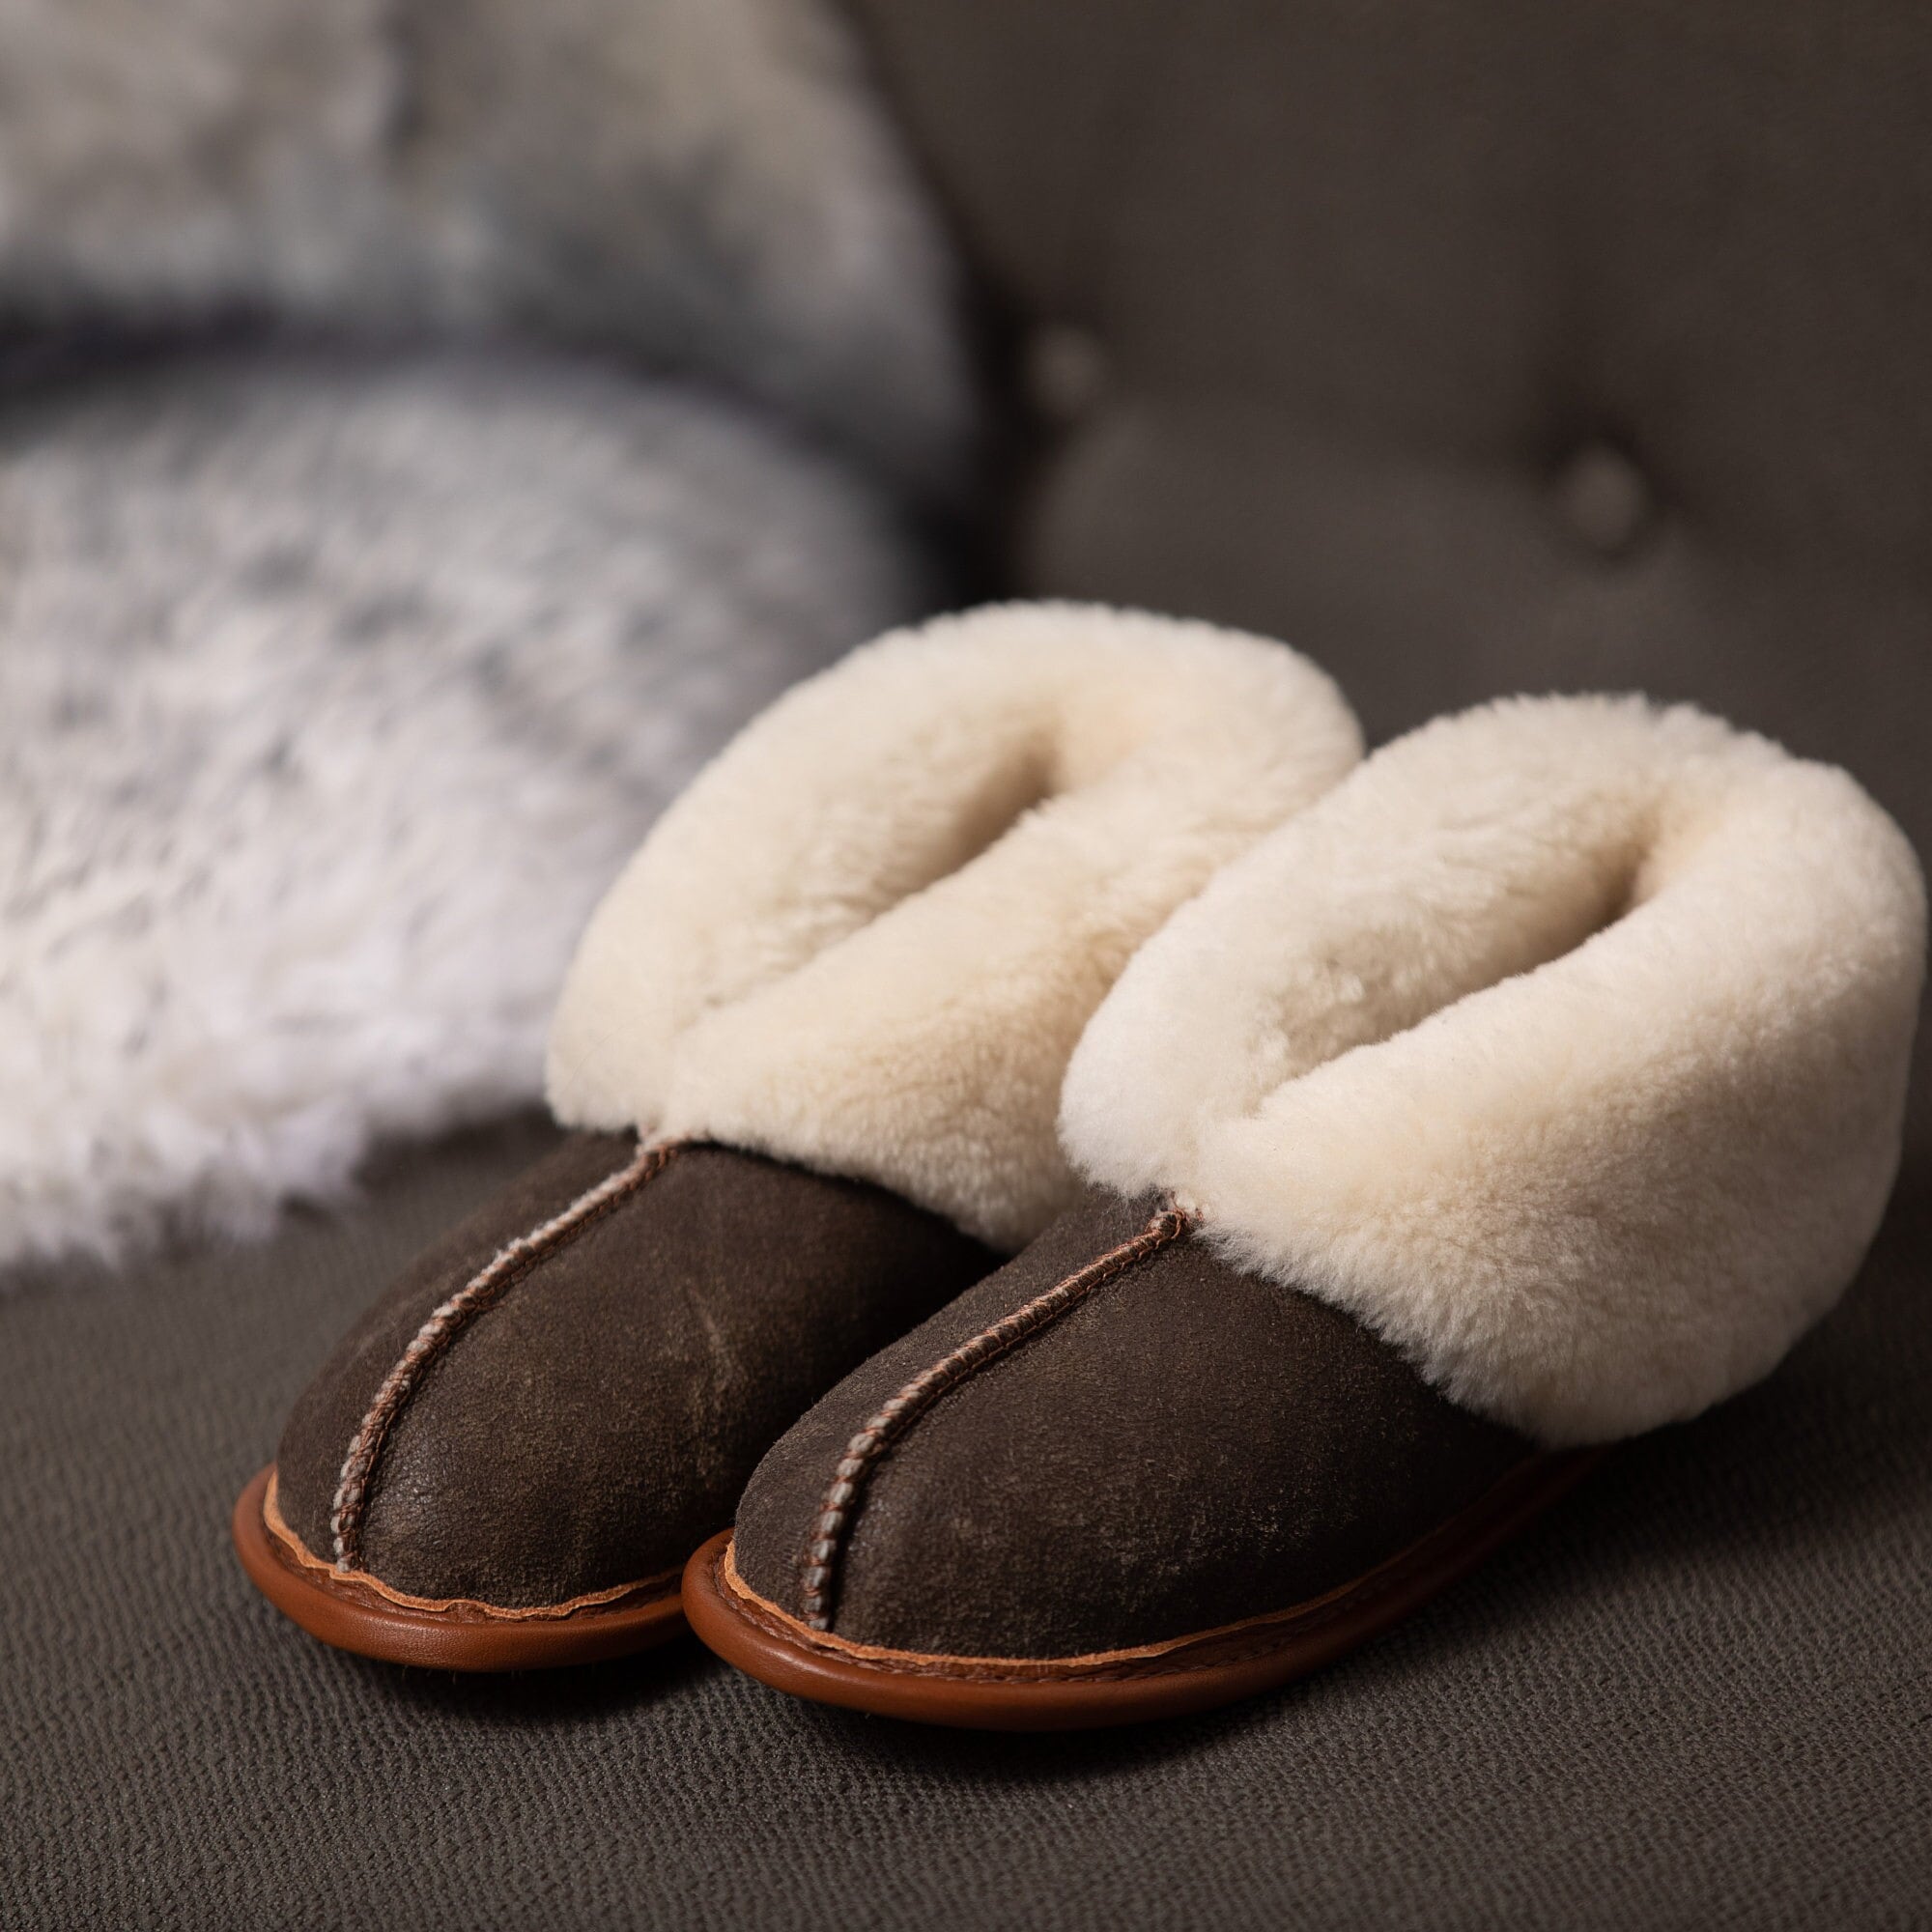 A brown pair of Ithaca Sheepskin slippers with the cuffs down to expose the cream colored fur lining, on a brown couch with a white and gray fleece in the background